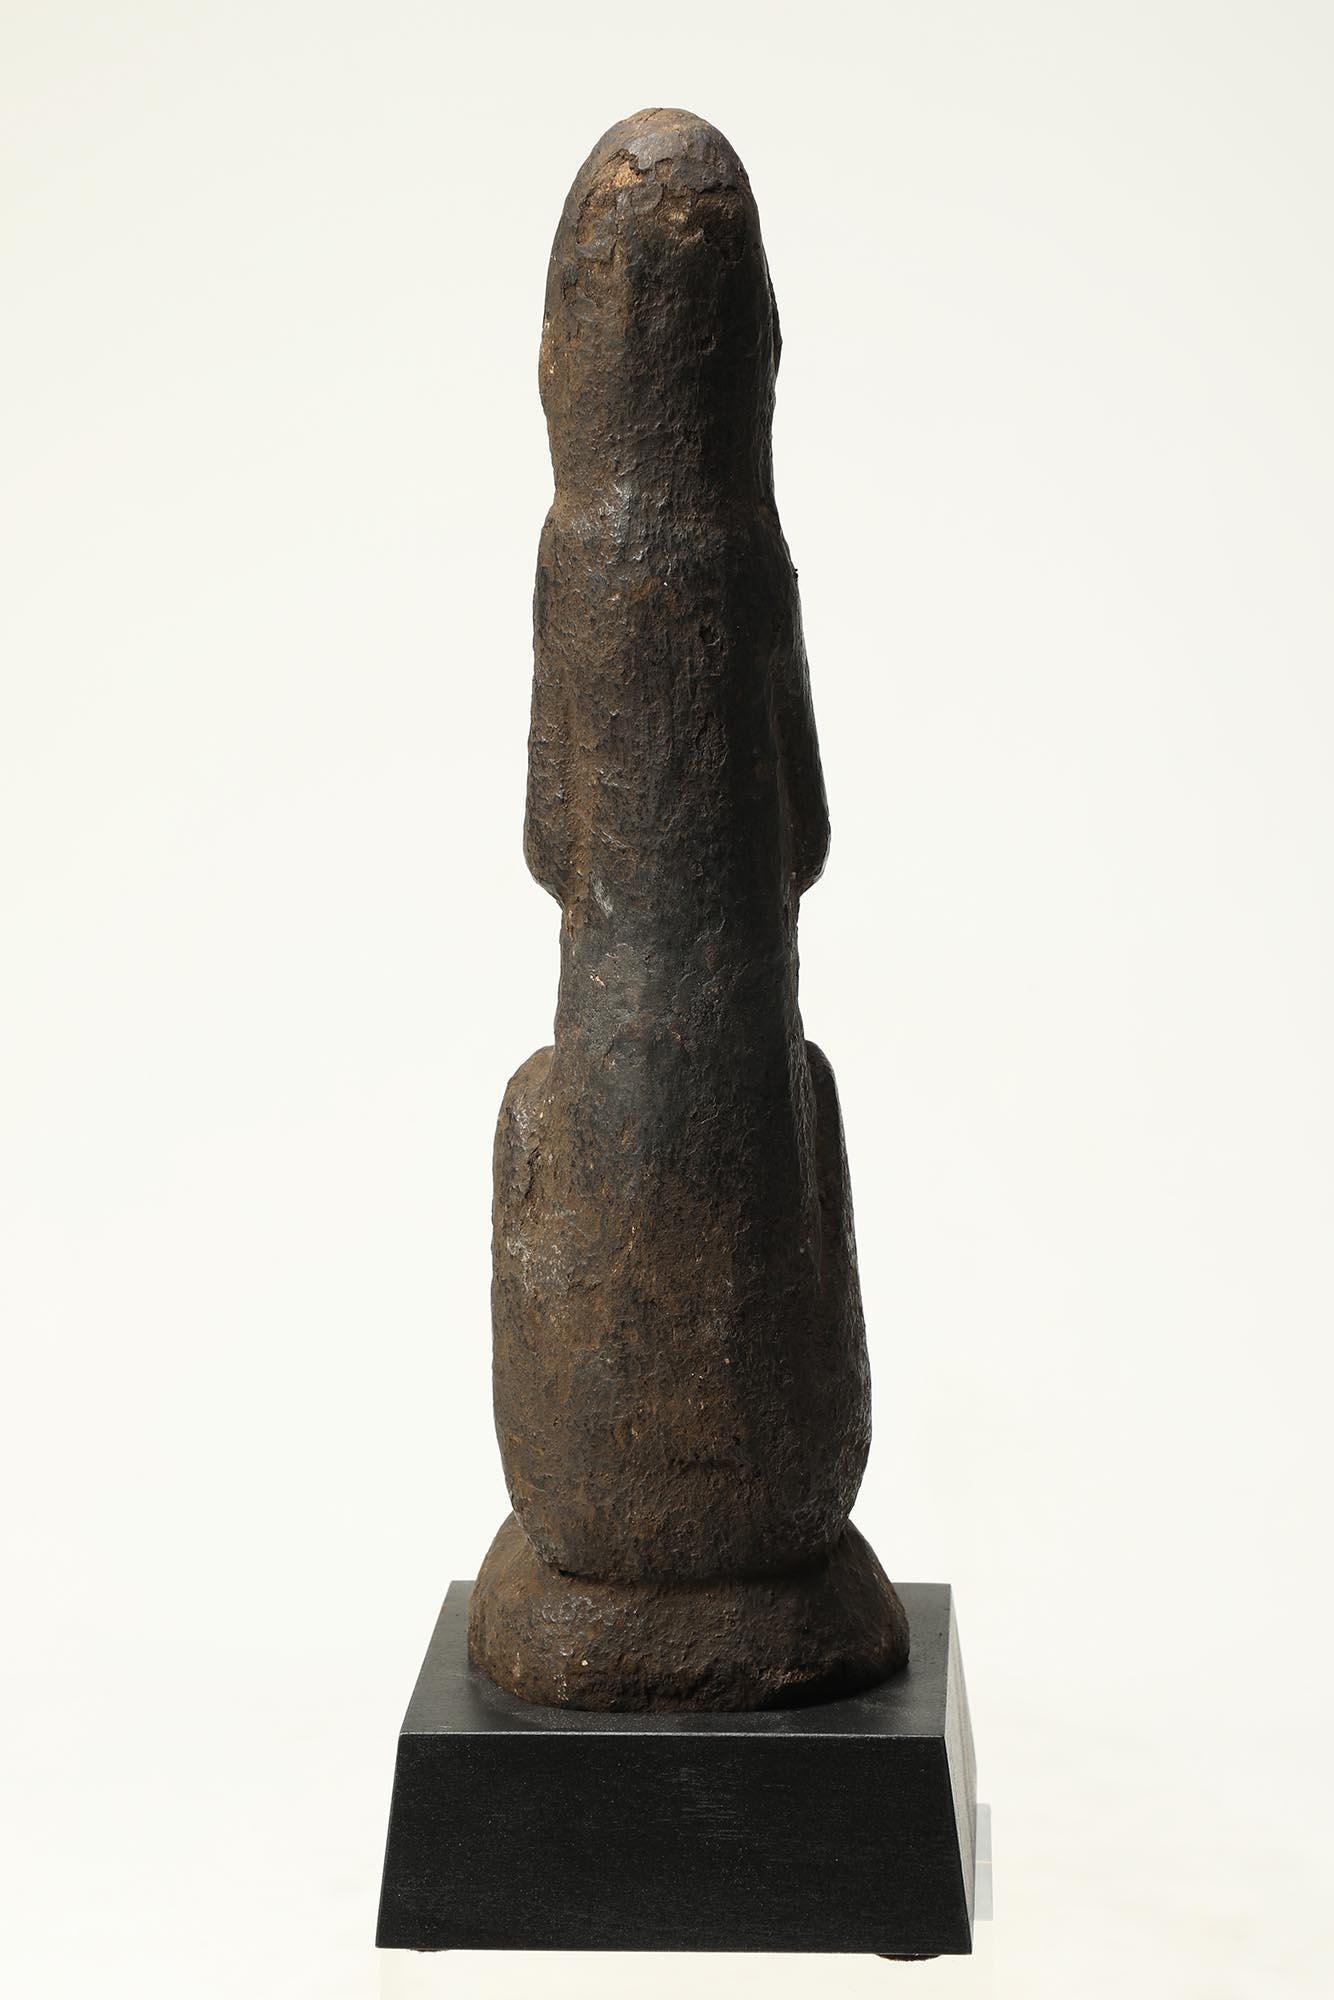 Old Tribal stone squatting spring figure with hands raised in namaste position, traces of clay and incrustation, expressive carved face. These were protective figures used in Nepal. Late 19th to early 20th century, 12 3/4 inches high. On solid